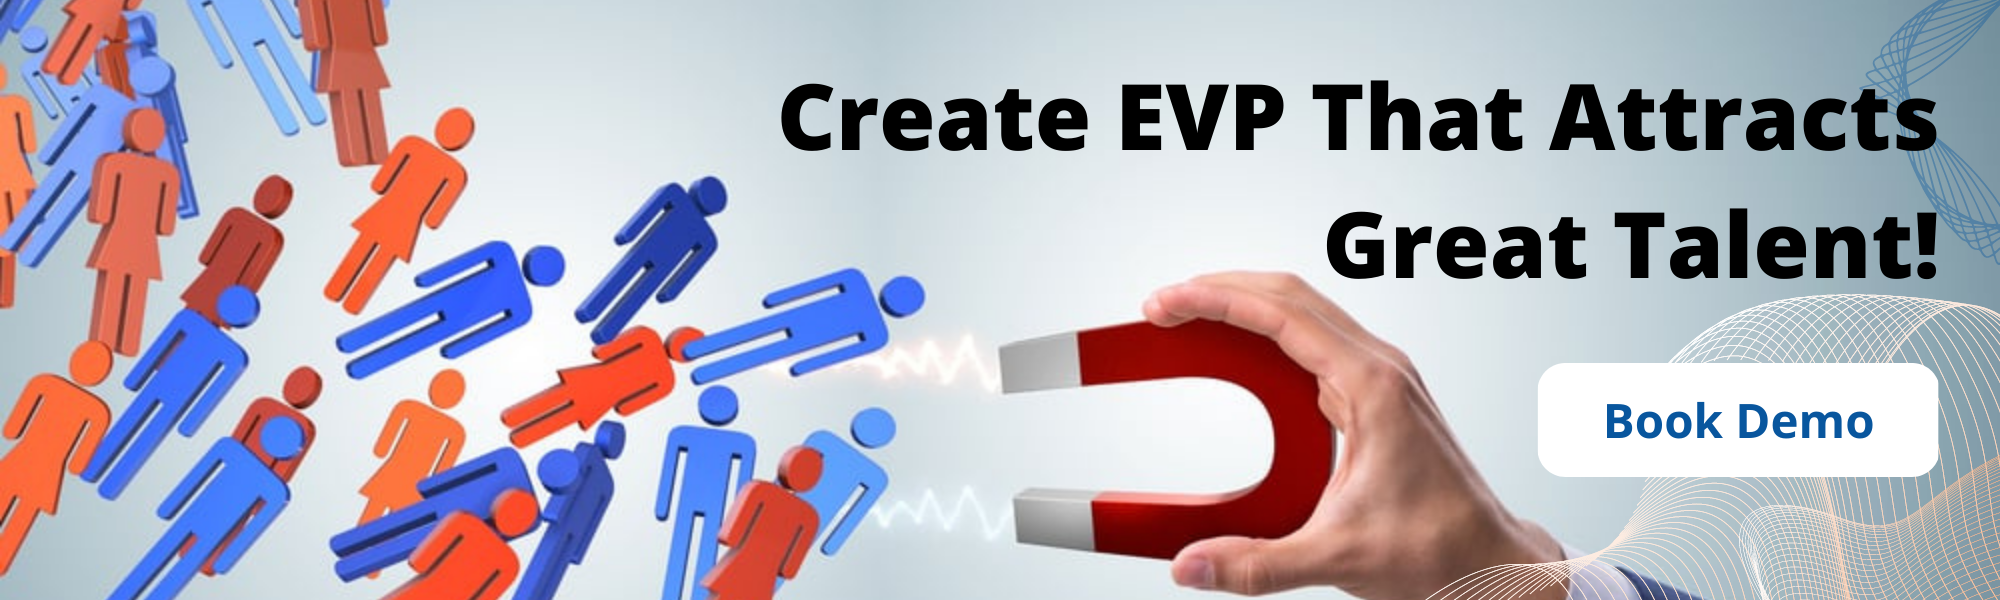 EVP that attracts talent